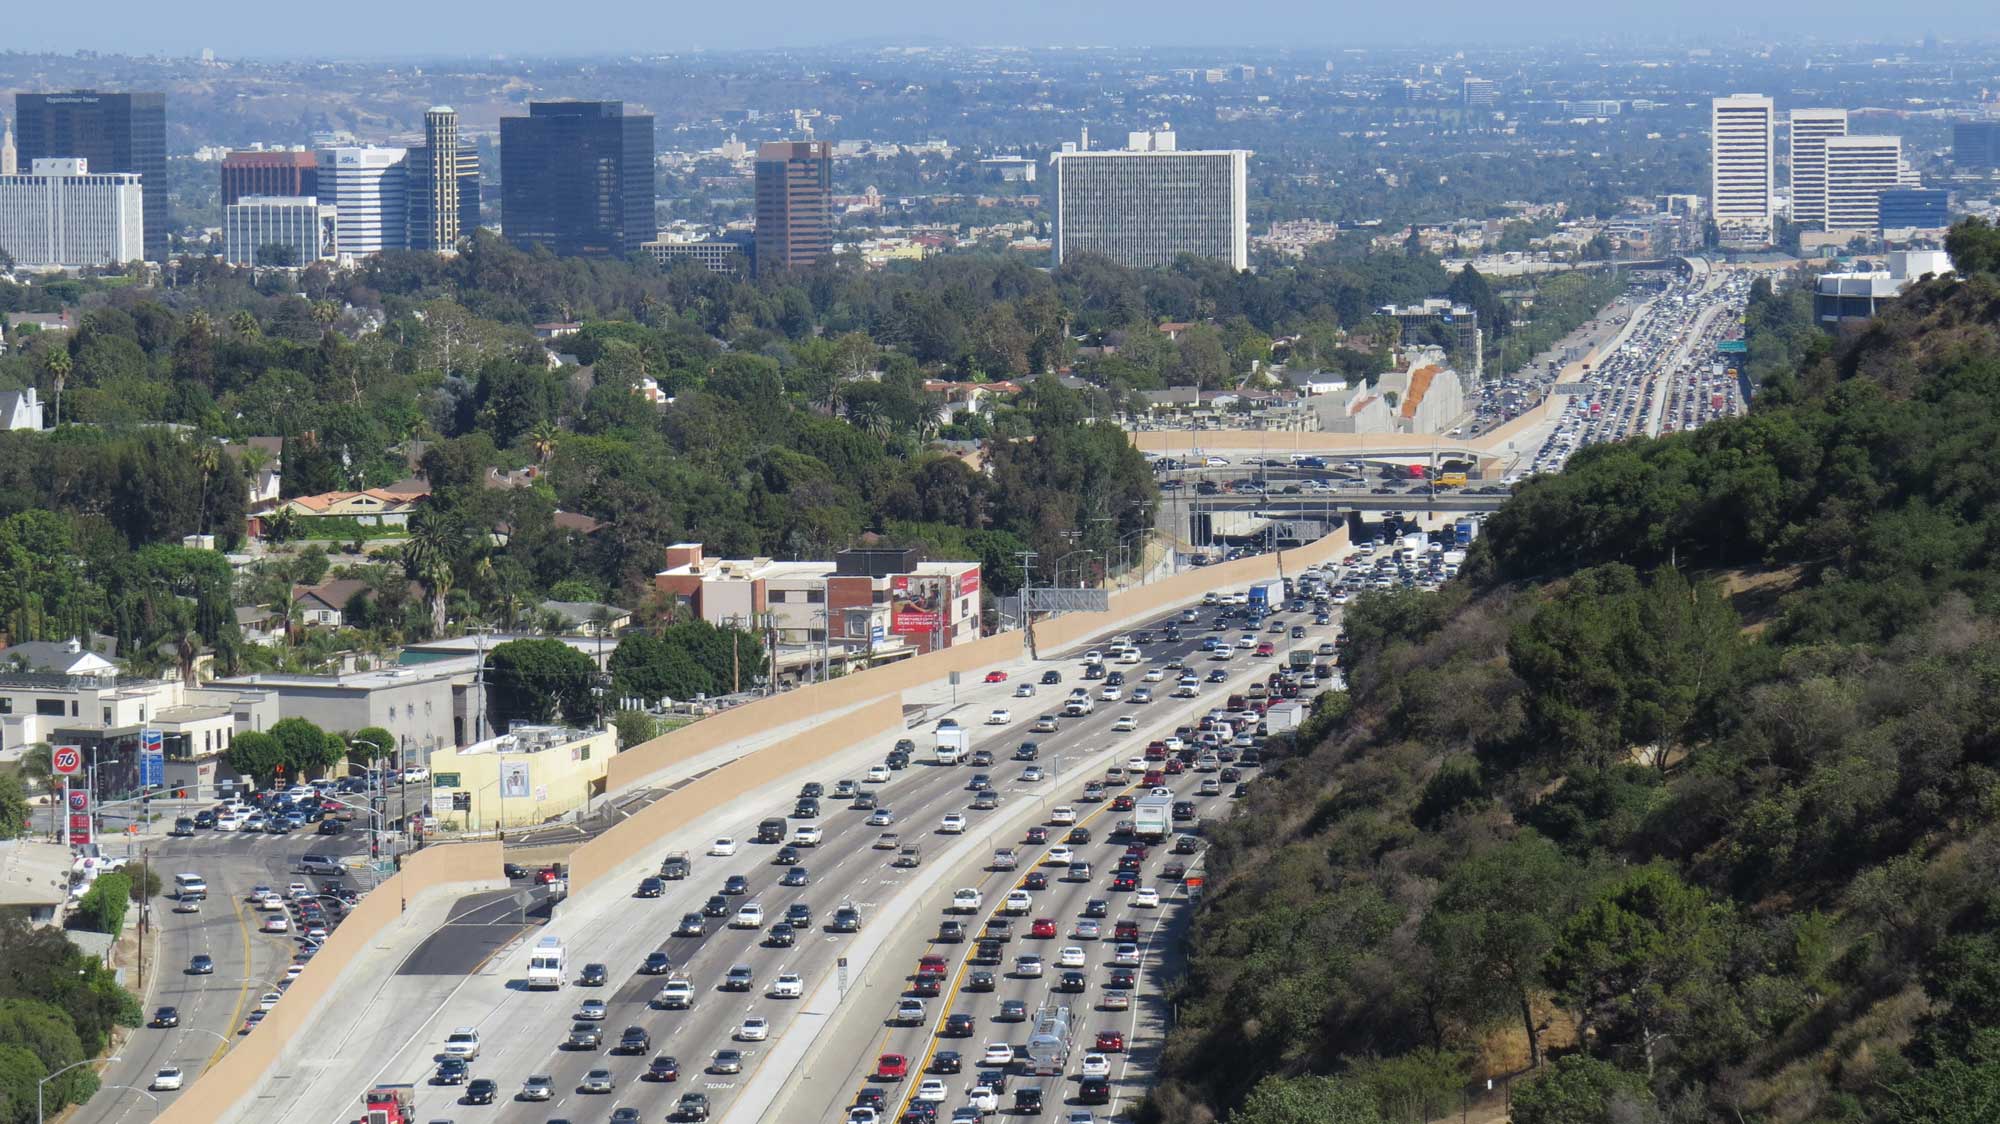 Photograph of Los Angeles showing large multilane roads full of cars.